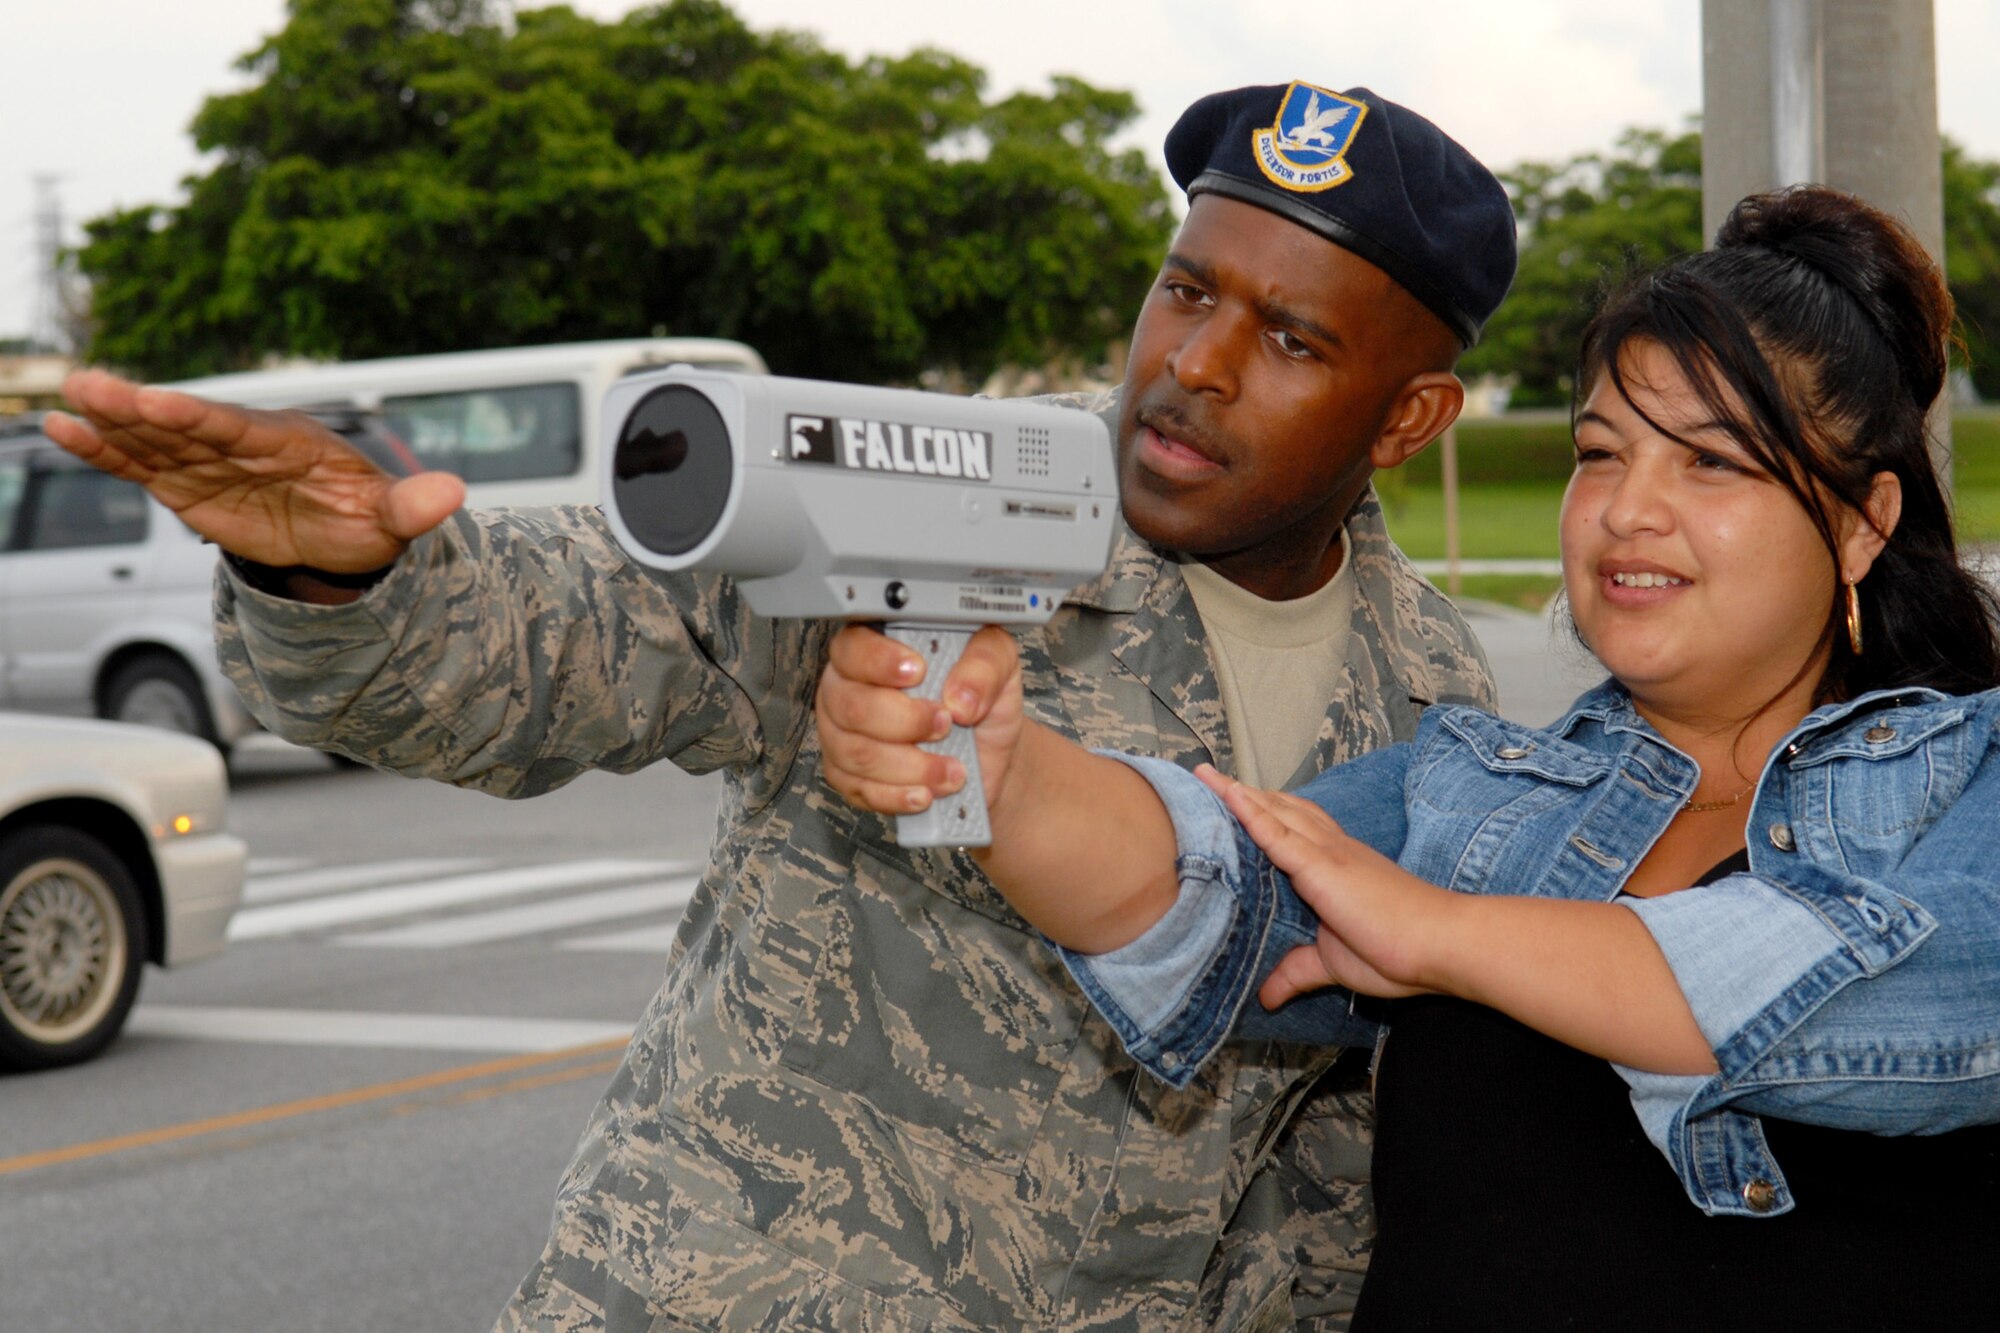 Tech. Sgt. Ronald Keeve, a member of the 18th Security Forces Squadron, instructs Army spouse Vanessa Chavez on the use of a speed detecting radar gun during the "Civilian Police Academy" course at Kadena, May 27.
(U.S. Air Force photo/Tech. Sgt. Angelique Perez) 